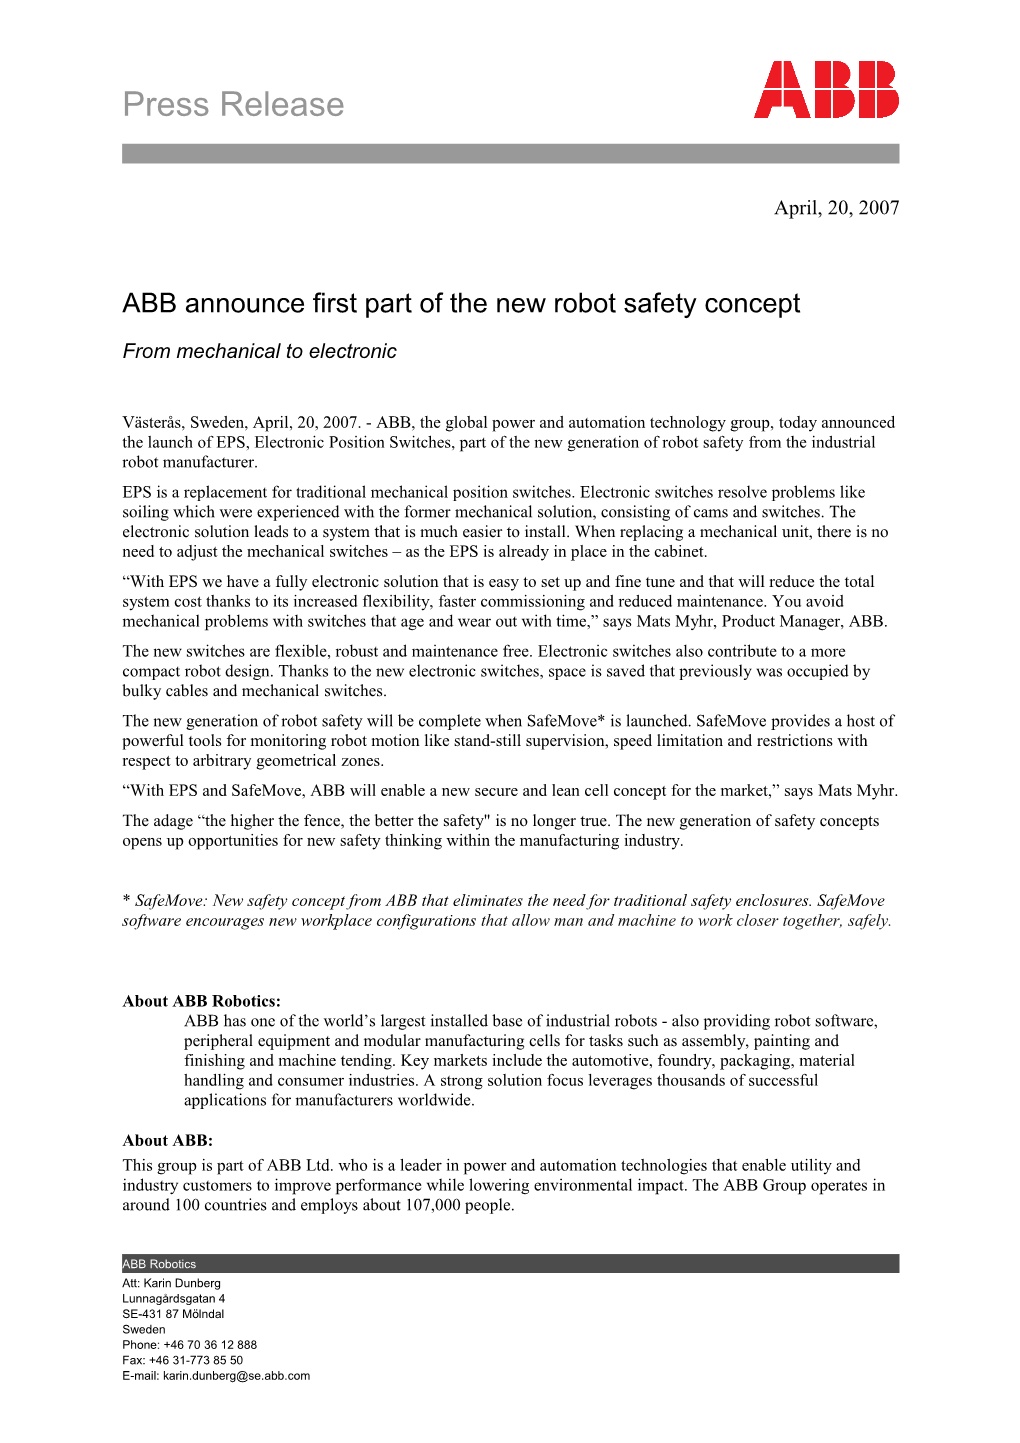 ABB Announce First Part of the New Robot Safety Concept